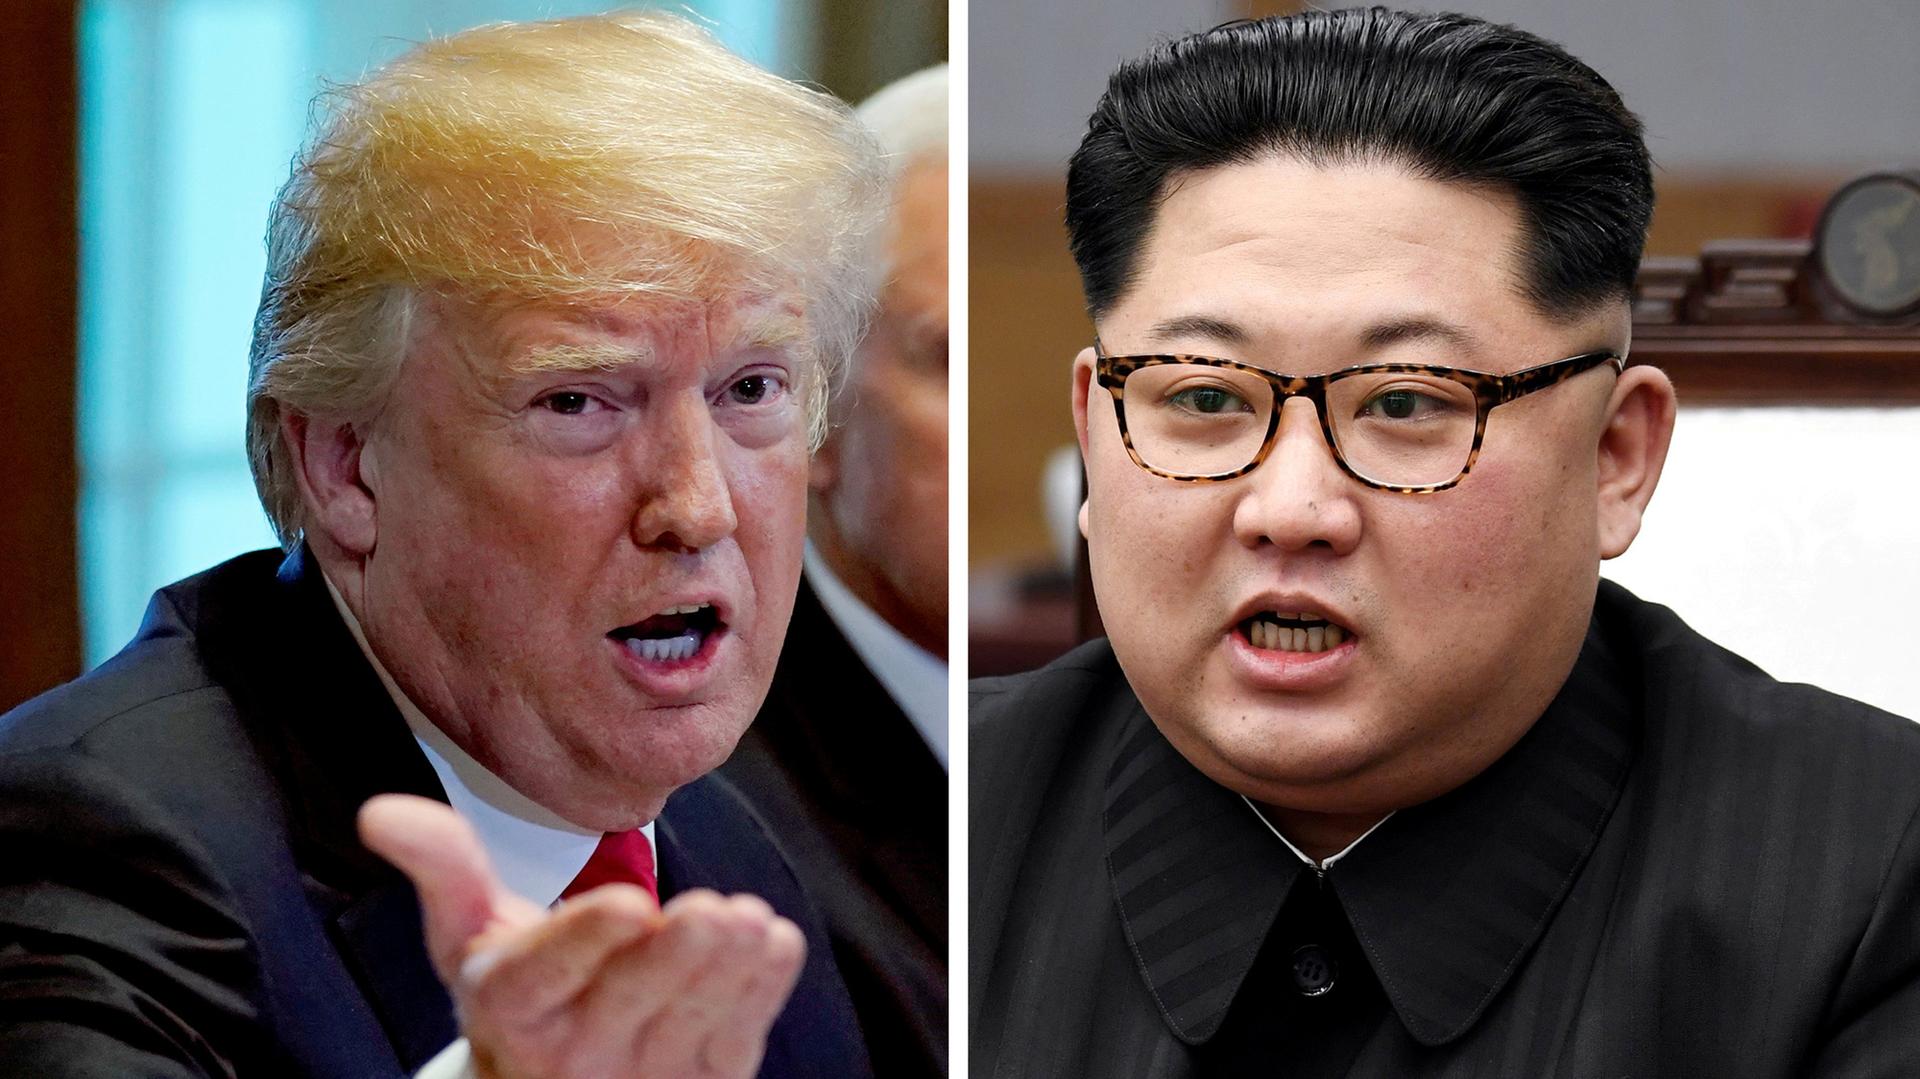 A side by side photos shows Donald Trump on the left and Kim Jong-un on the right.